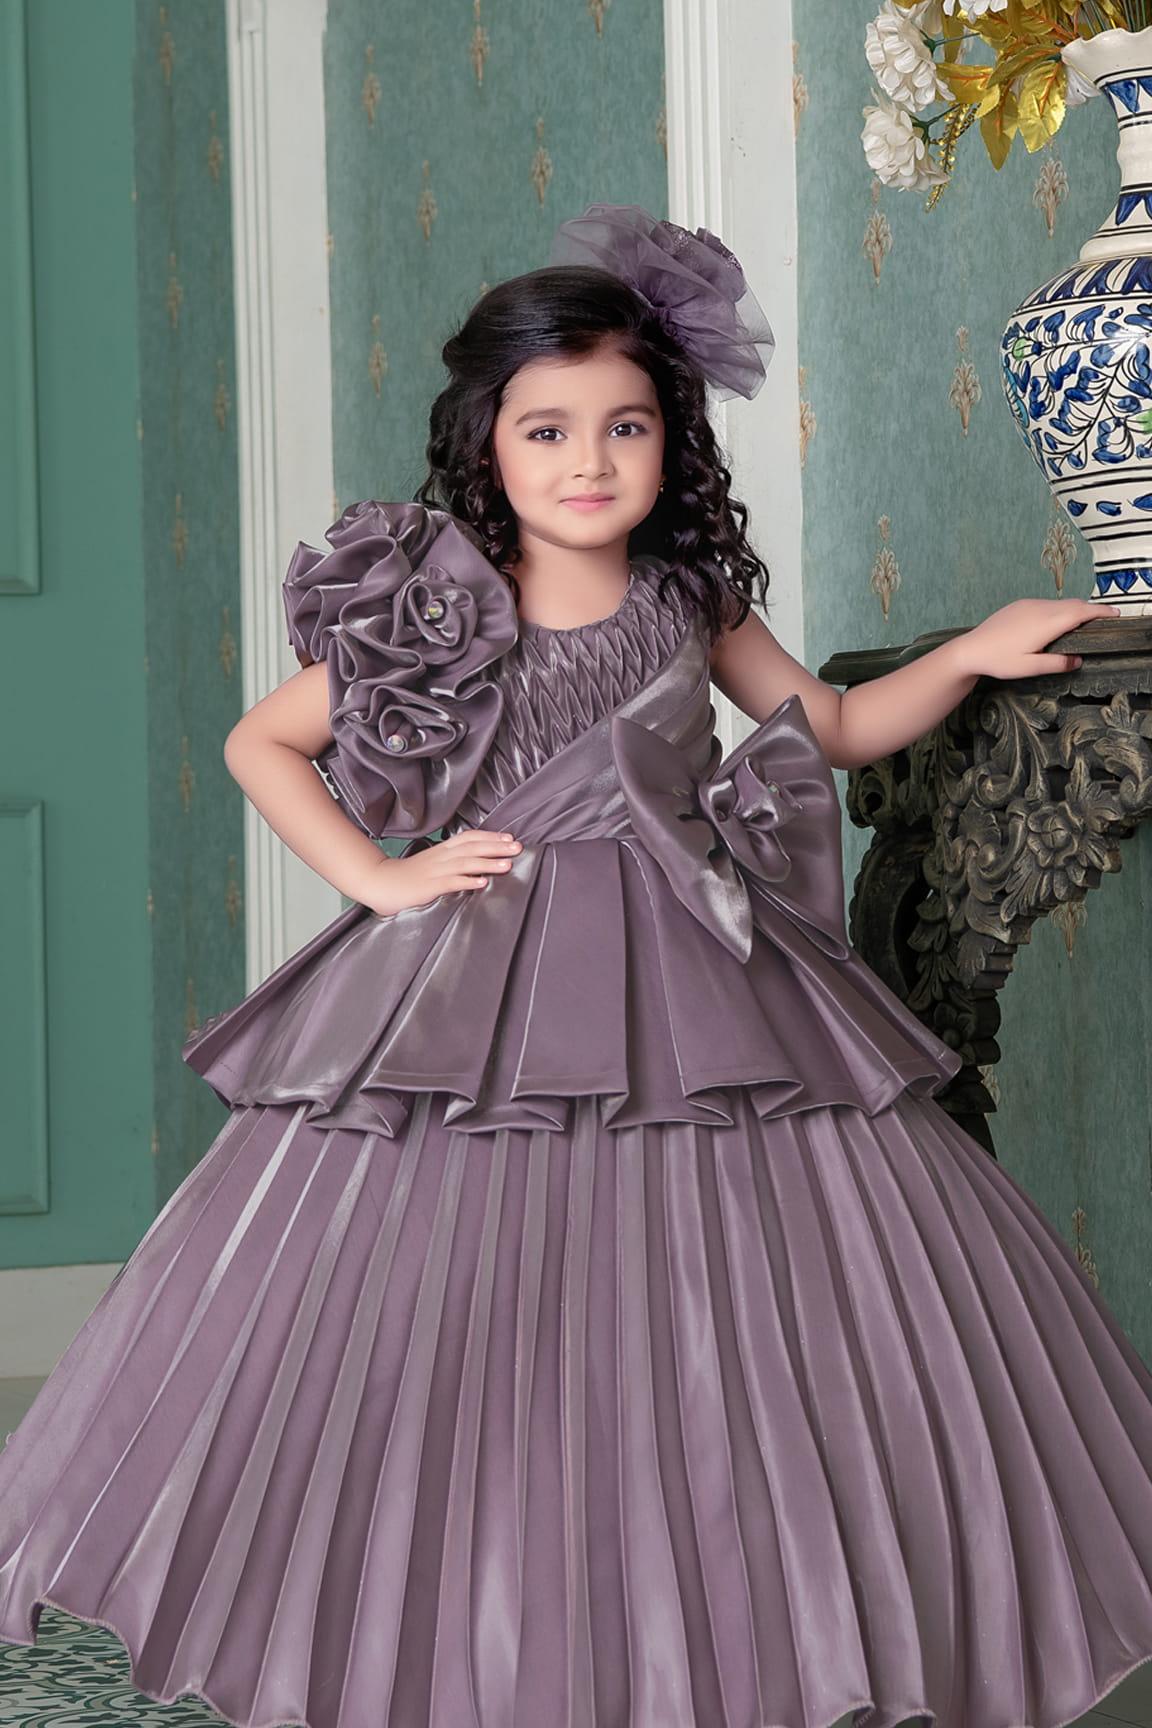 Designer Mauve Satin Full Length Layered Gown With Embellished Flowers For Girls - Lagorii Kids